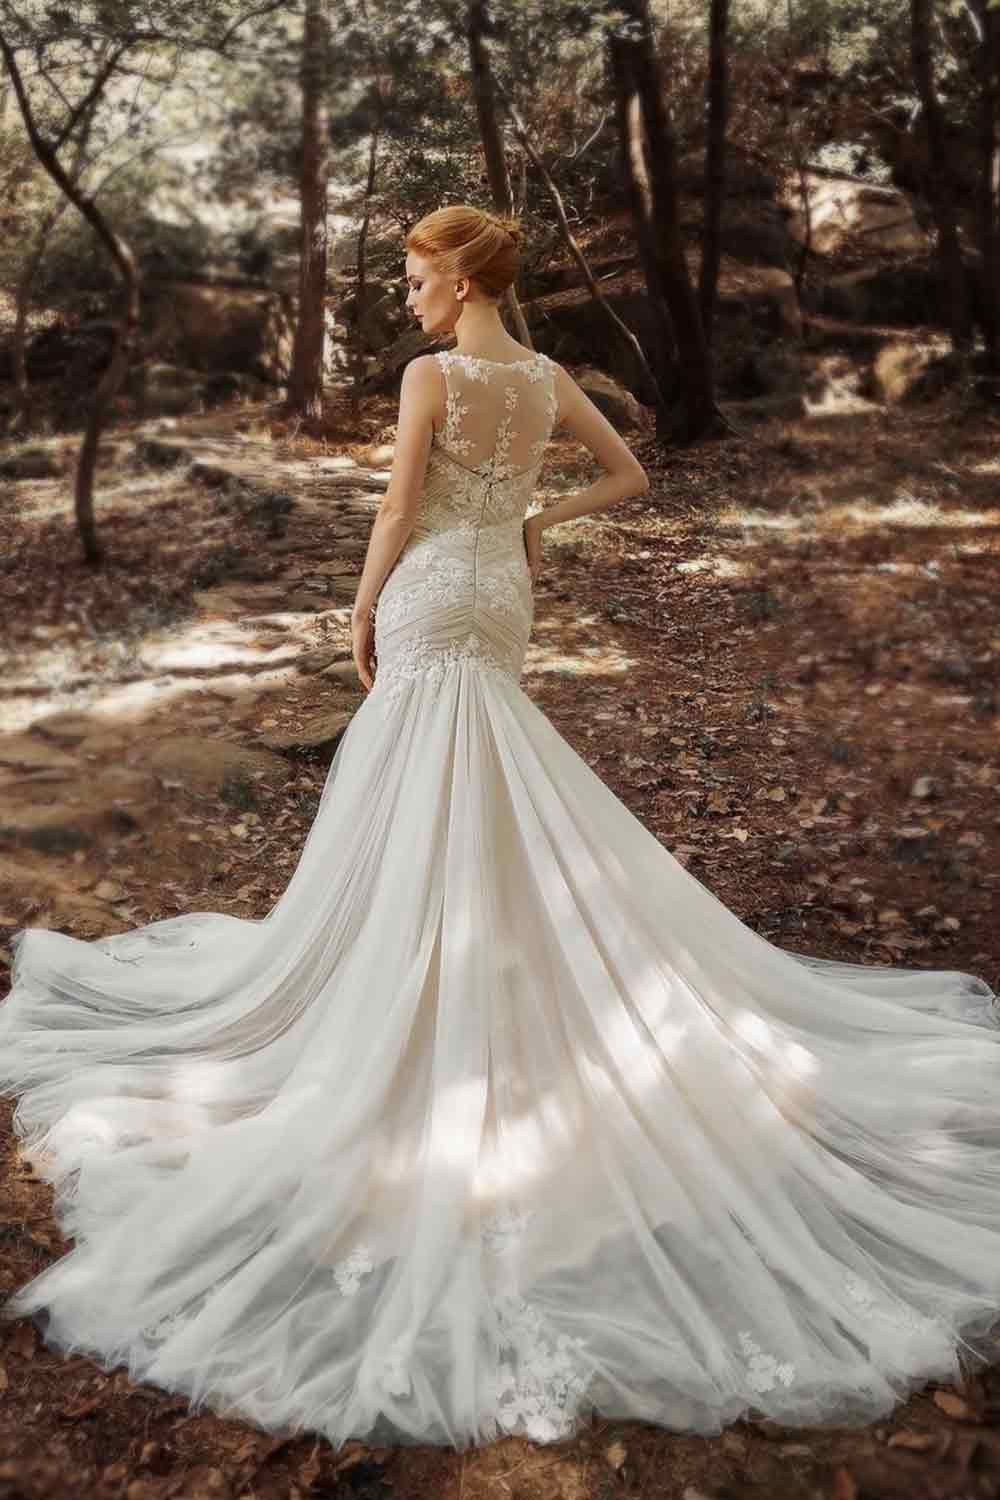 Exclusive Mermaid Wedding Dress Ideas For Your Unforgettable Look